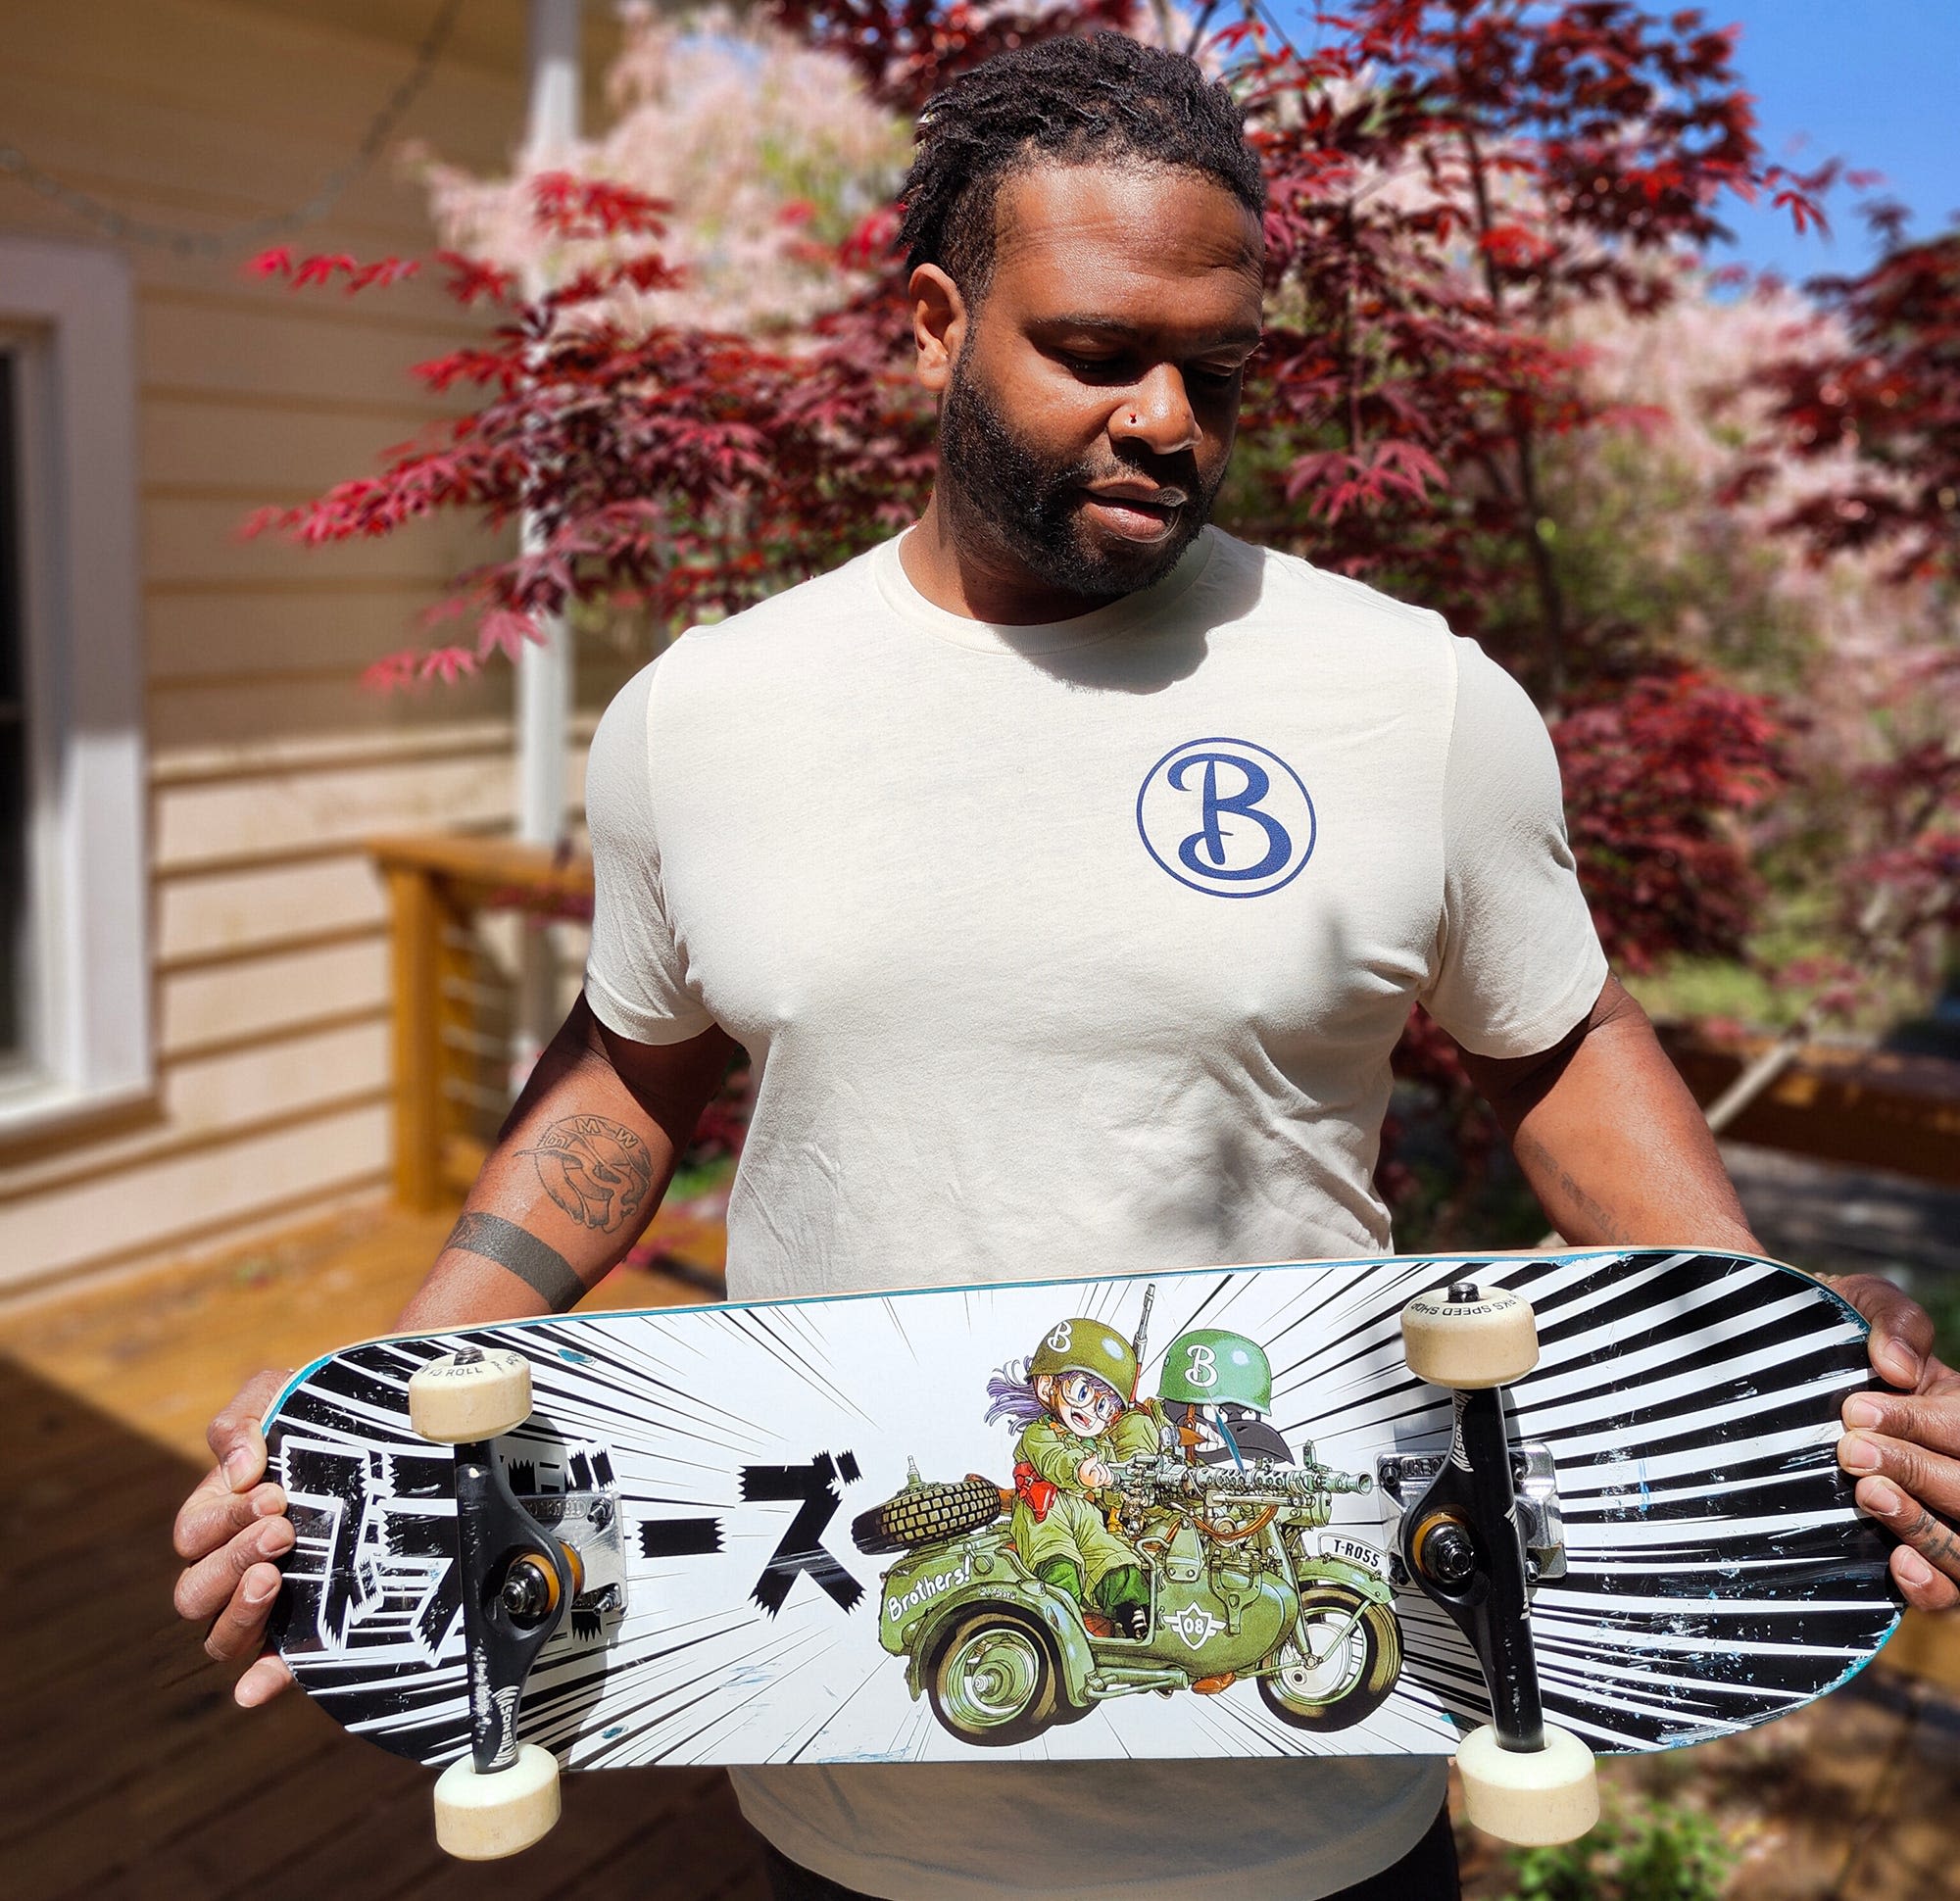 Skateboard art show celebrates Athens connection between trio of Los Angeles natives